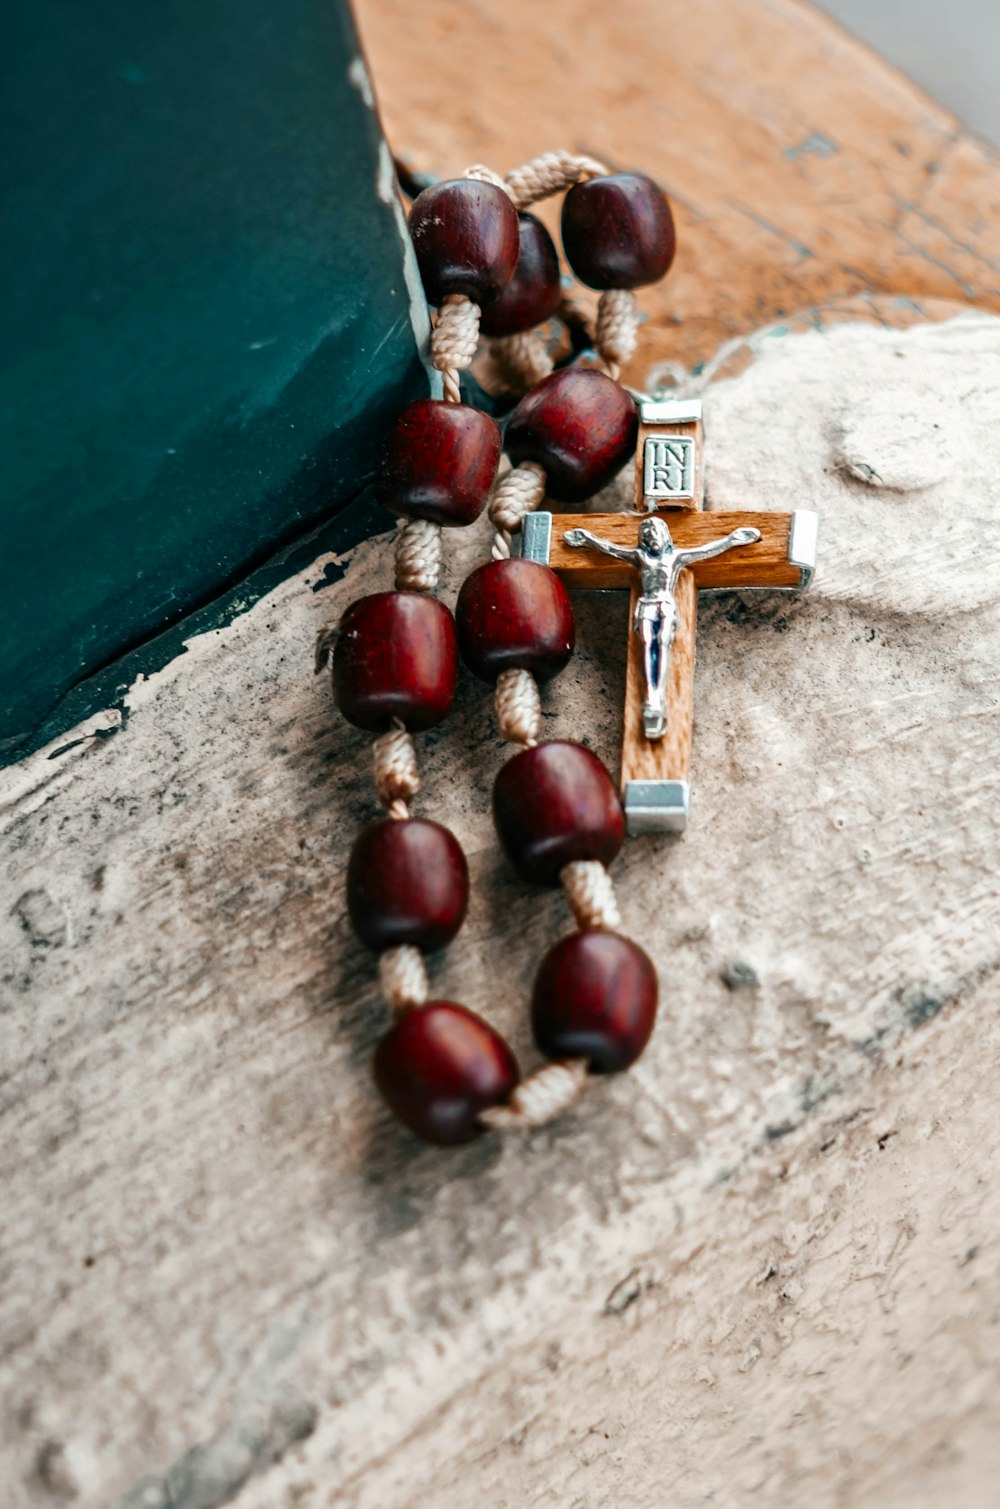 550+ Rosary Pictures | Download Free Images on Unsplash